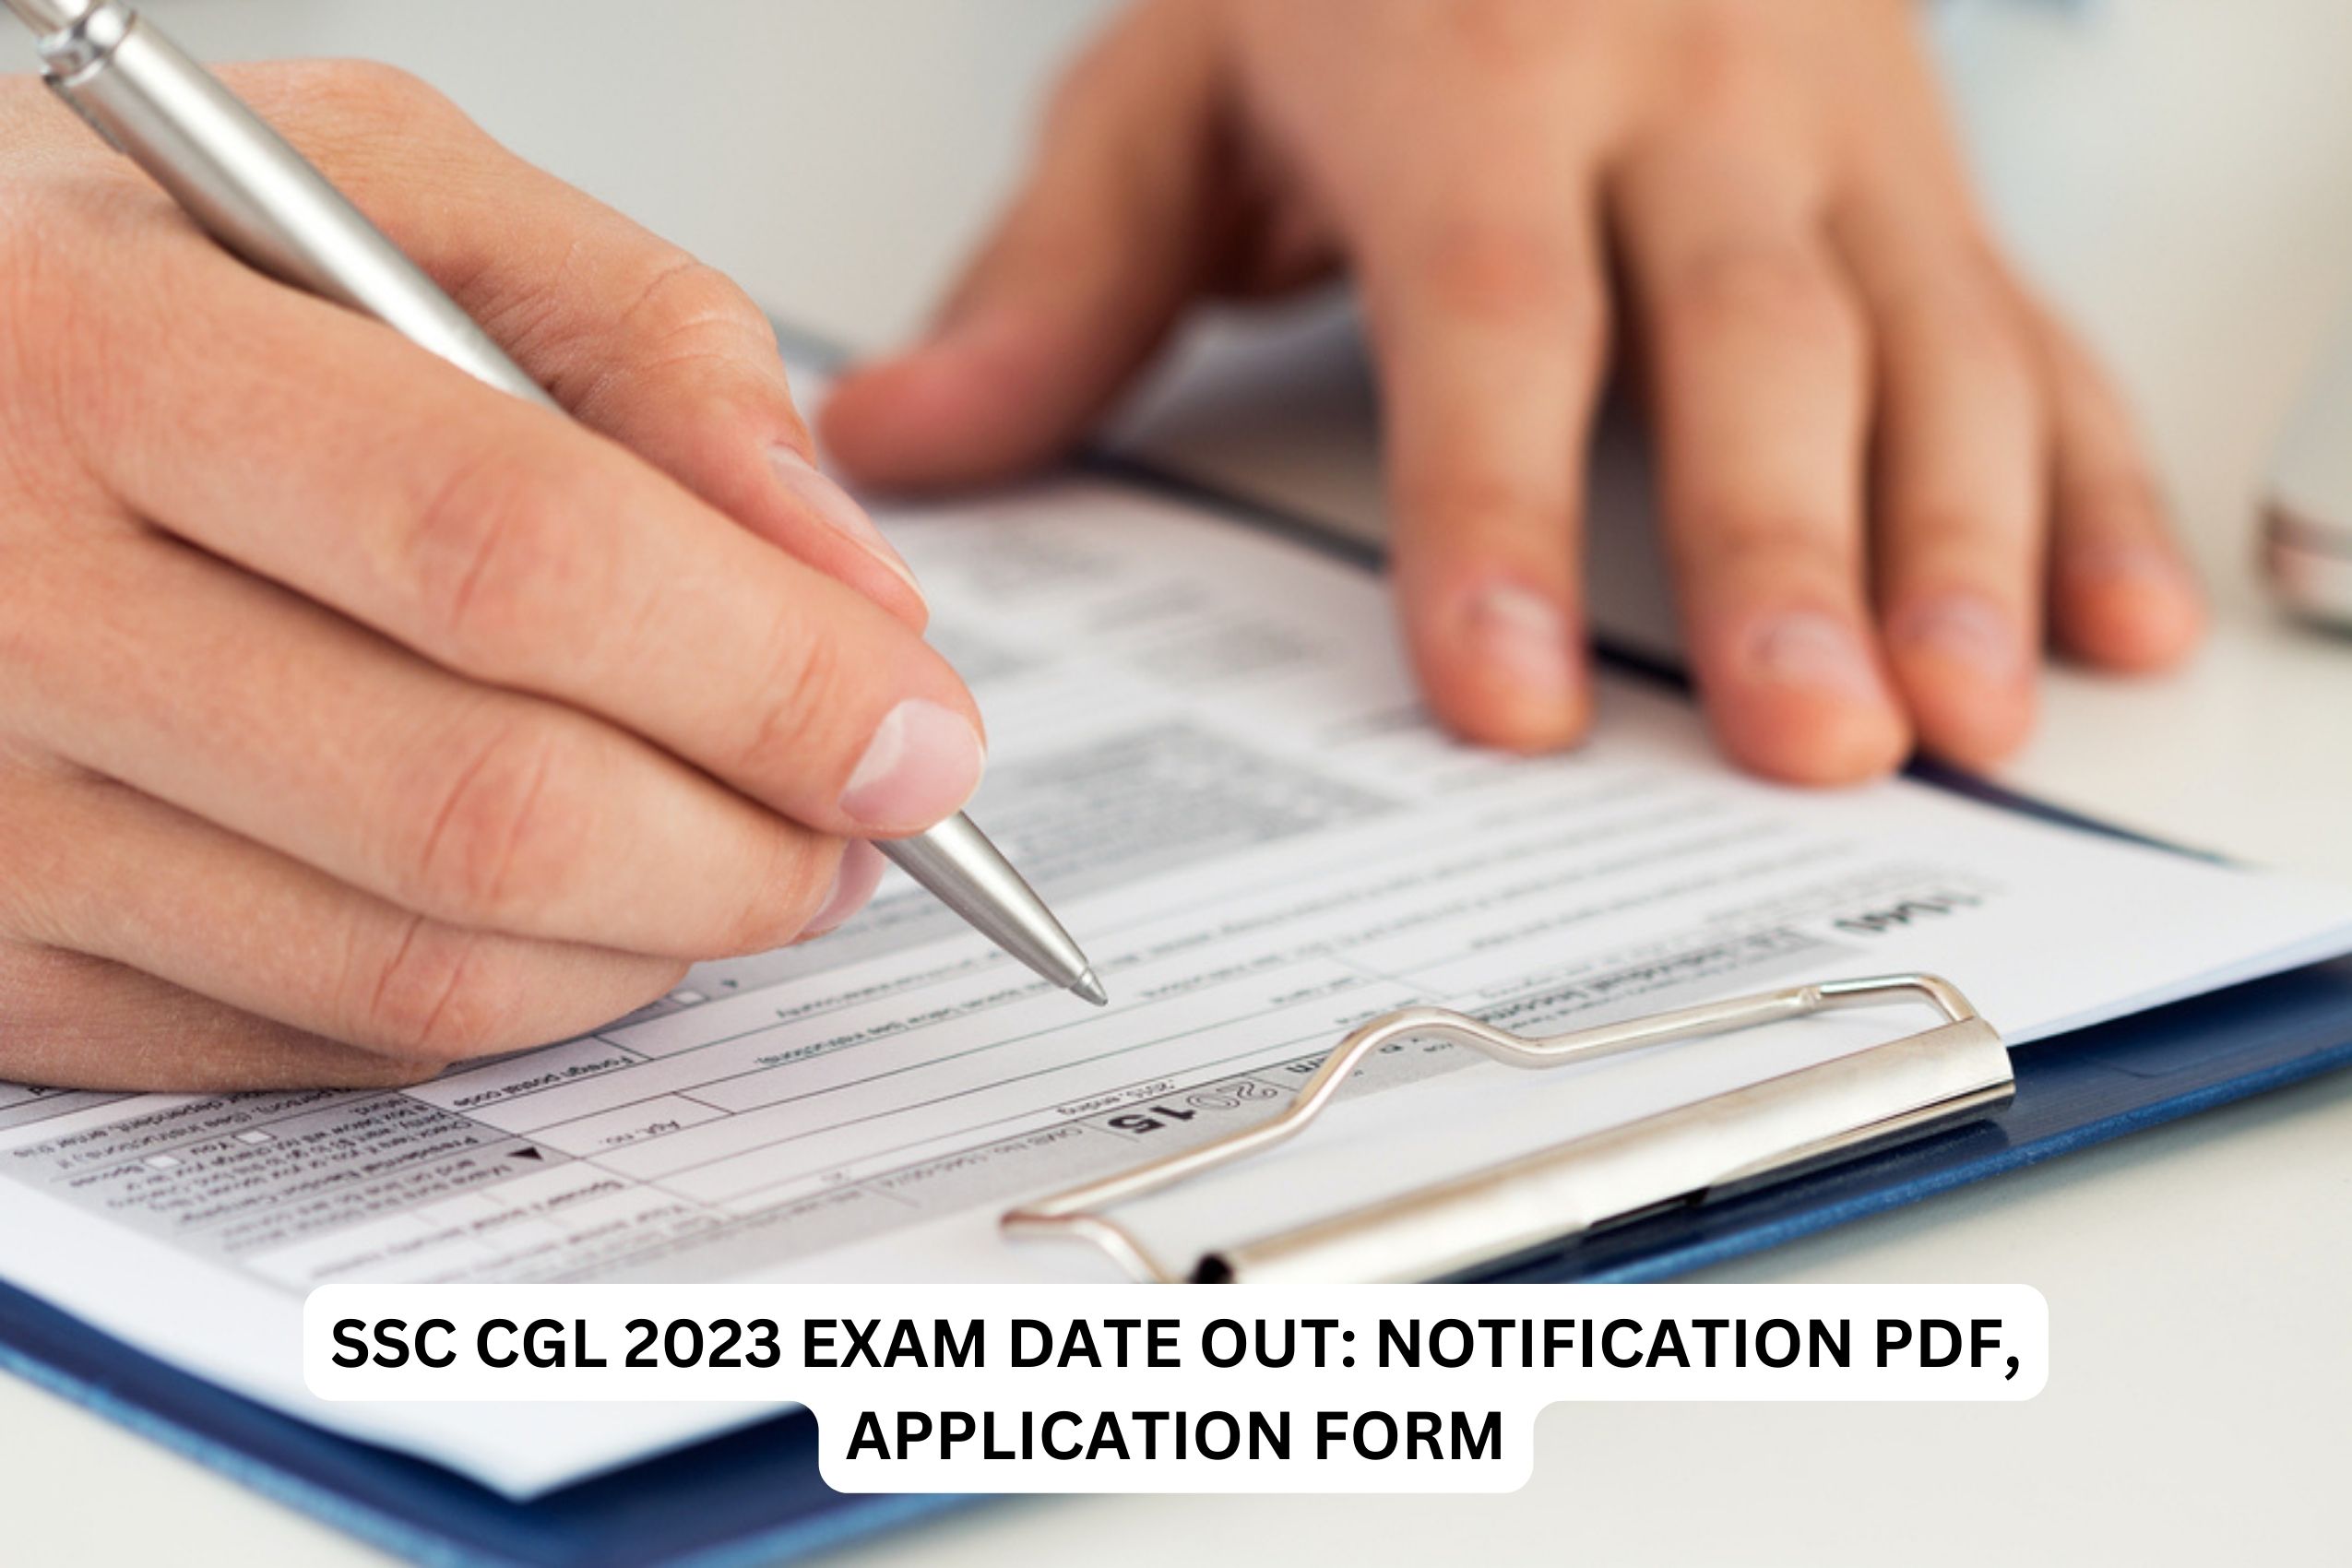 SSC CGL 2023 Exam Date Out: Notification PDF, Application Form